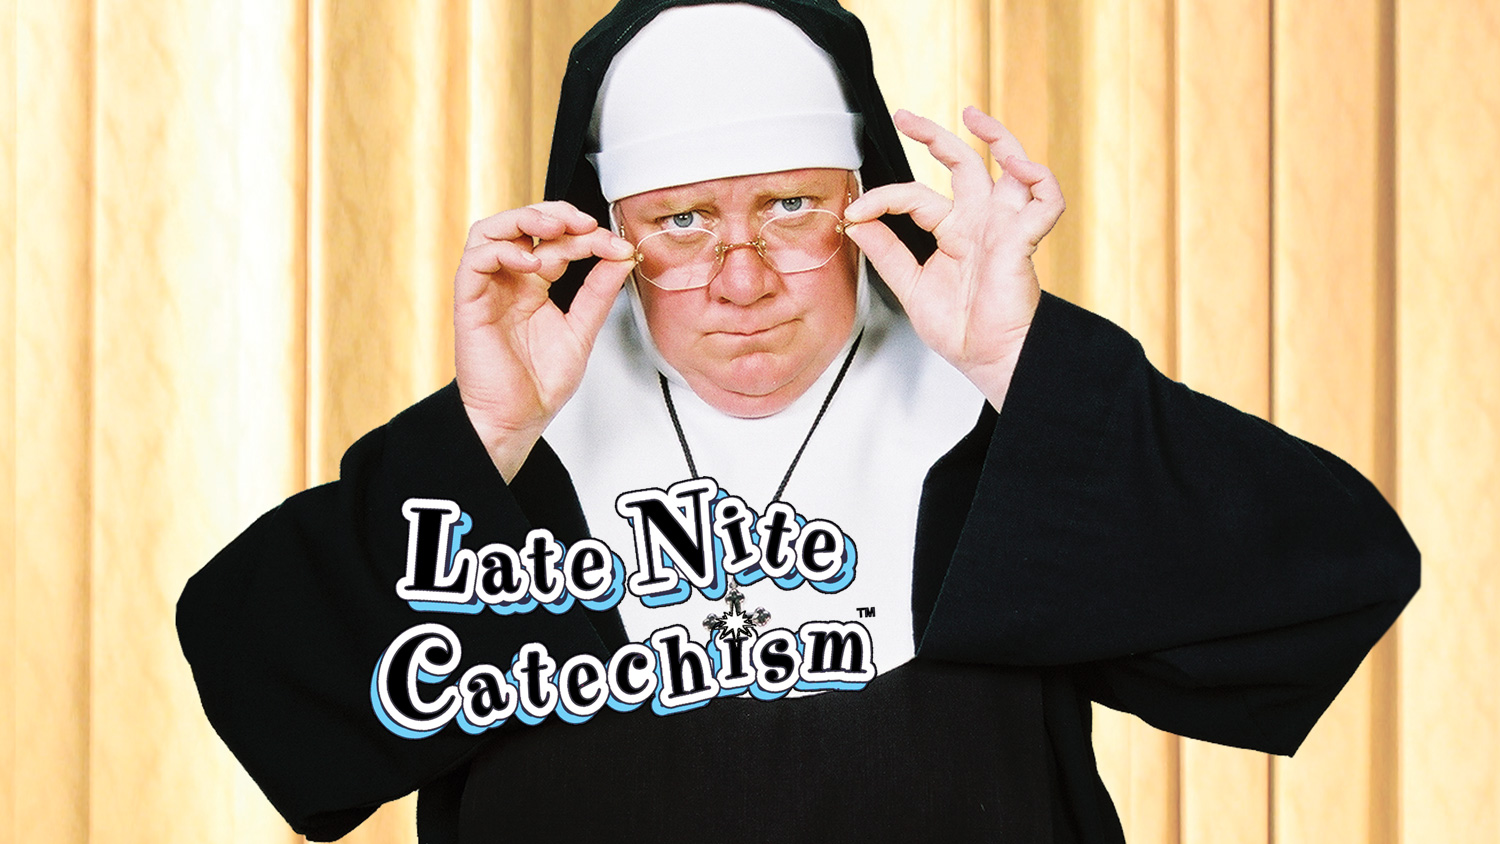 Nun with composite of Late Nite Catechism logo